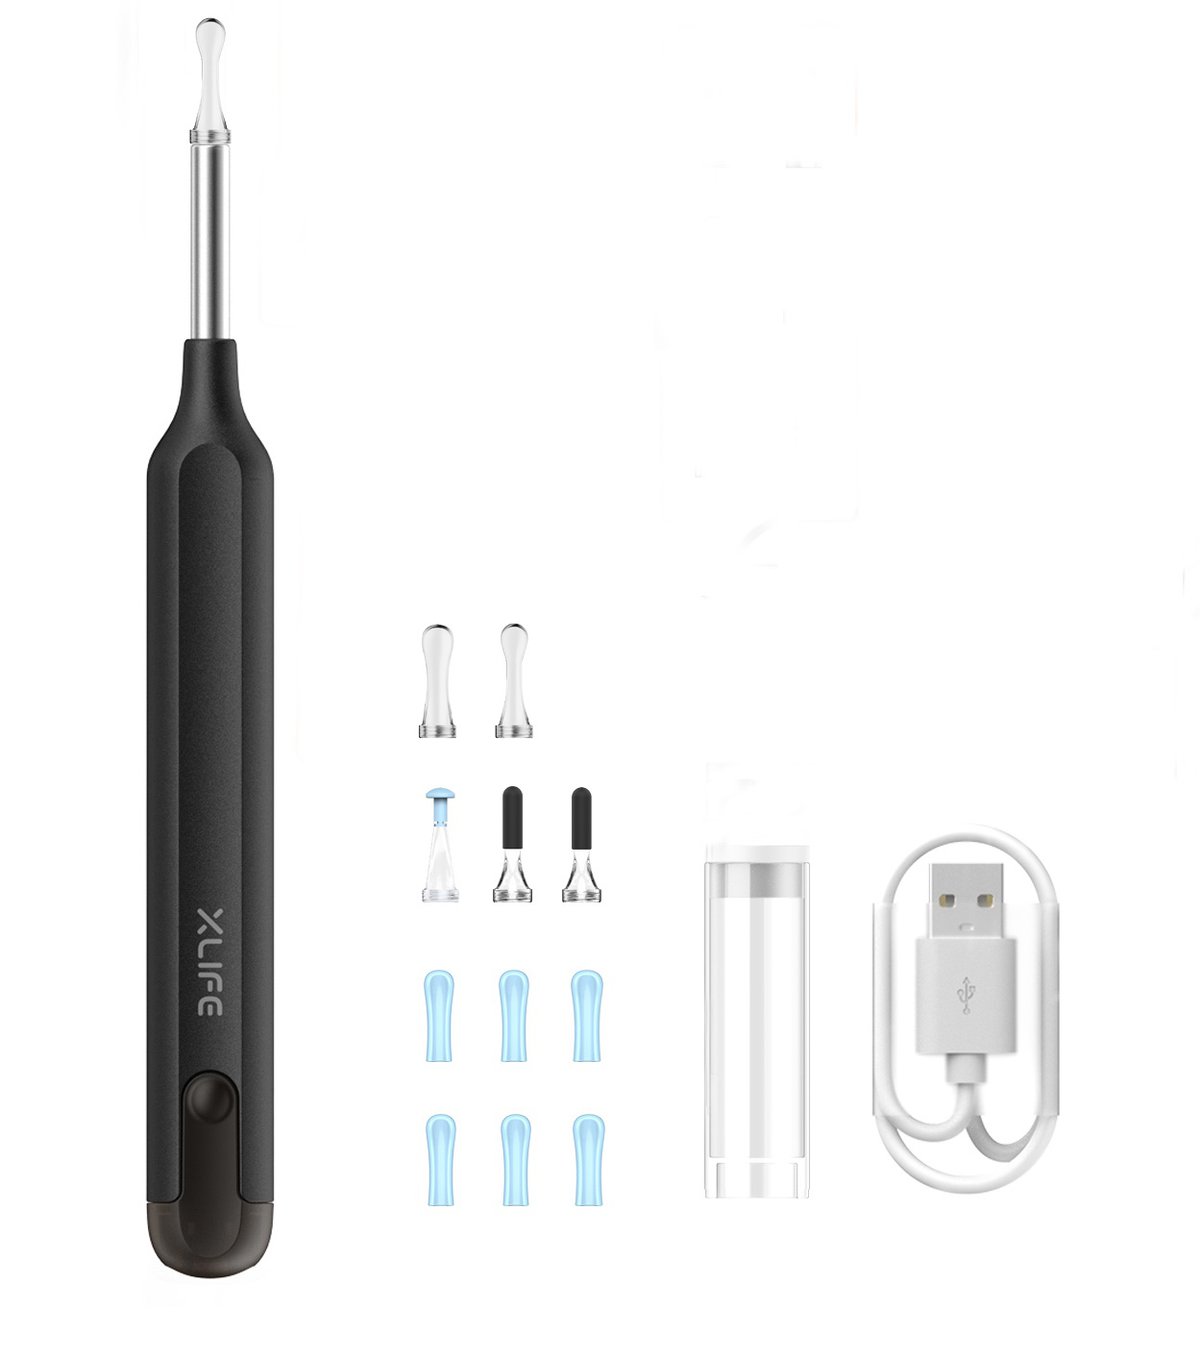 Black X1 EAR/BeBird otoscope with 21 tips, cover and charging cord.